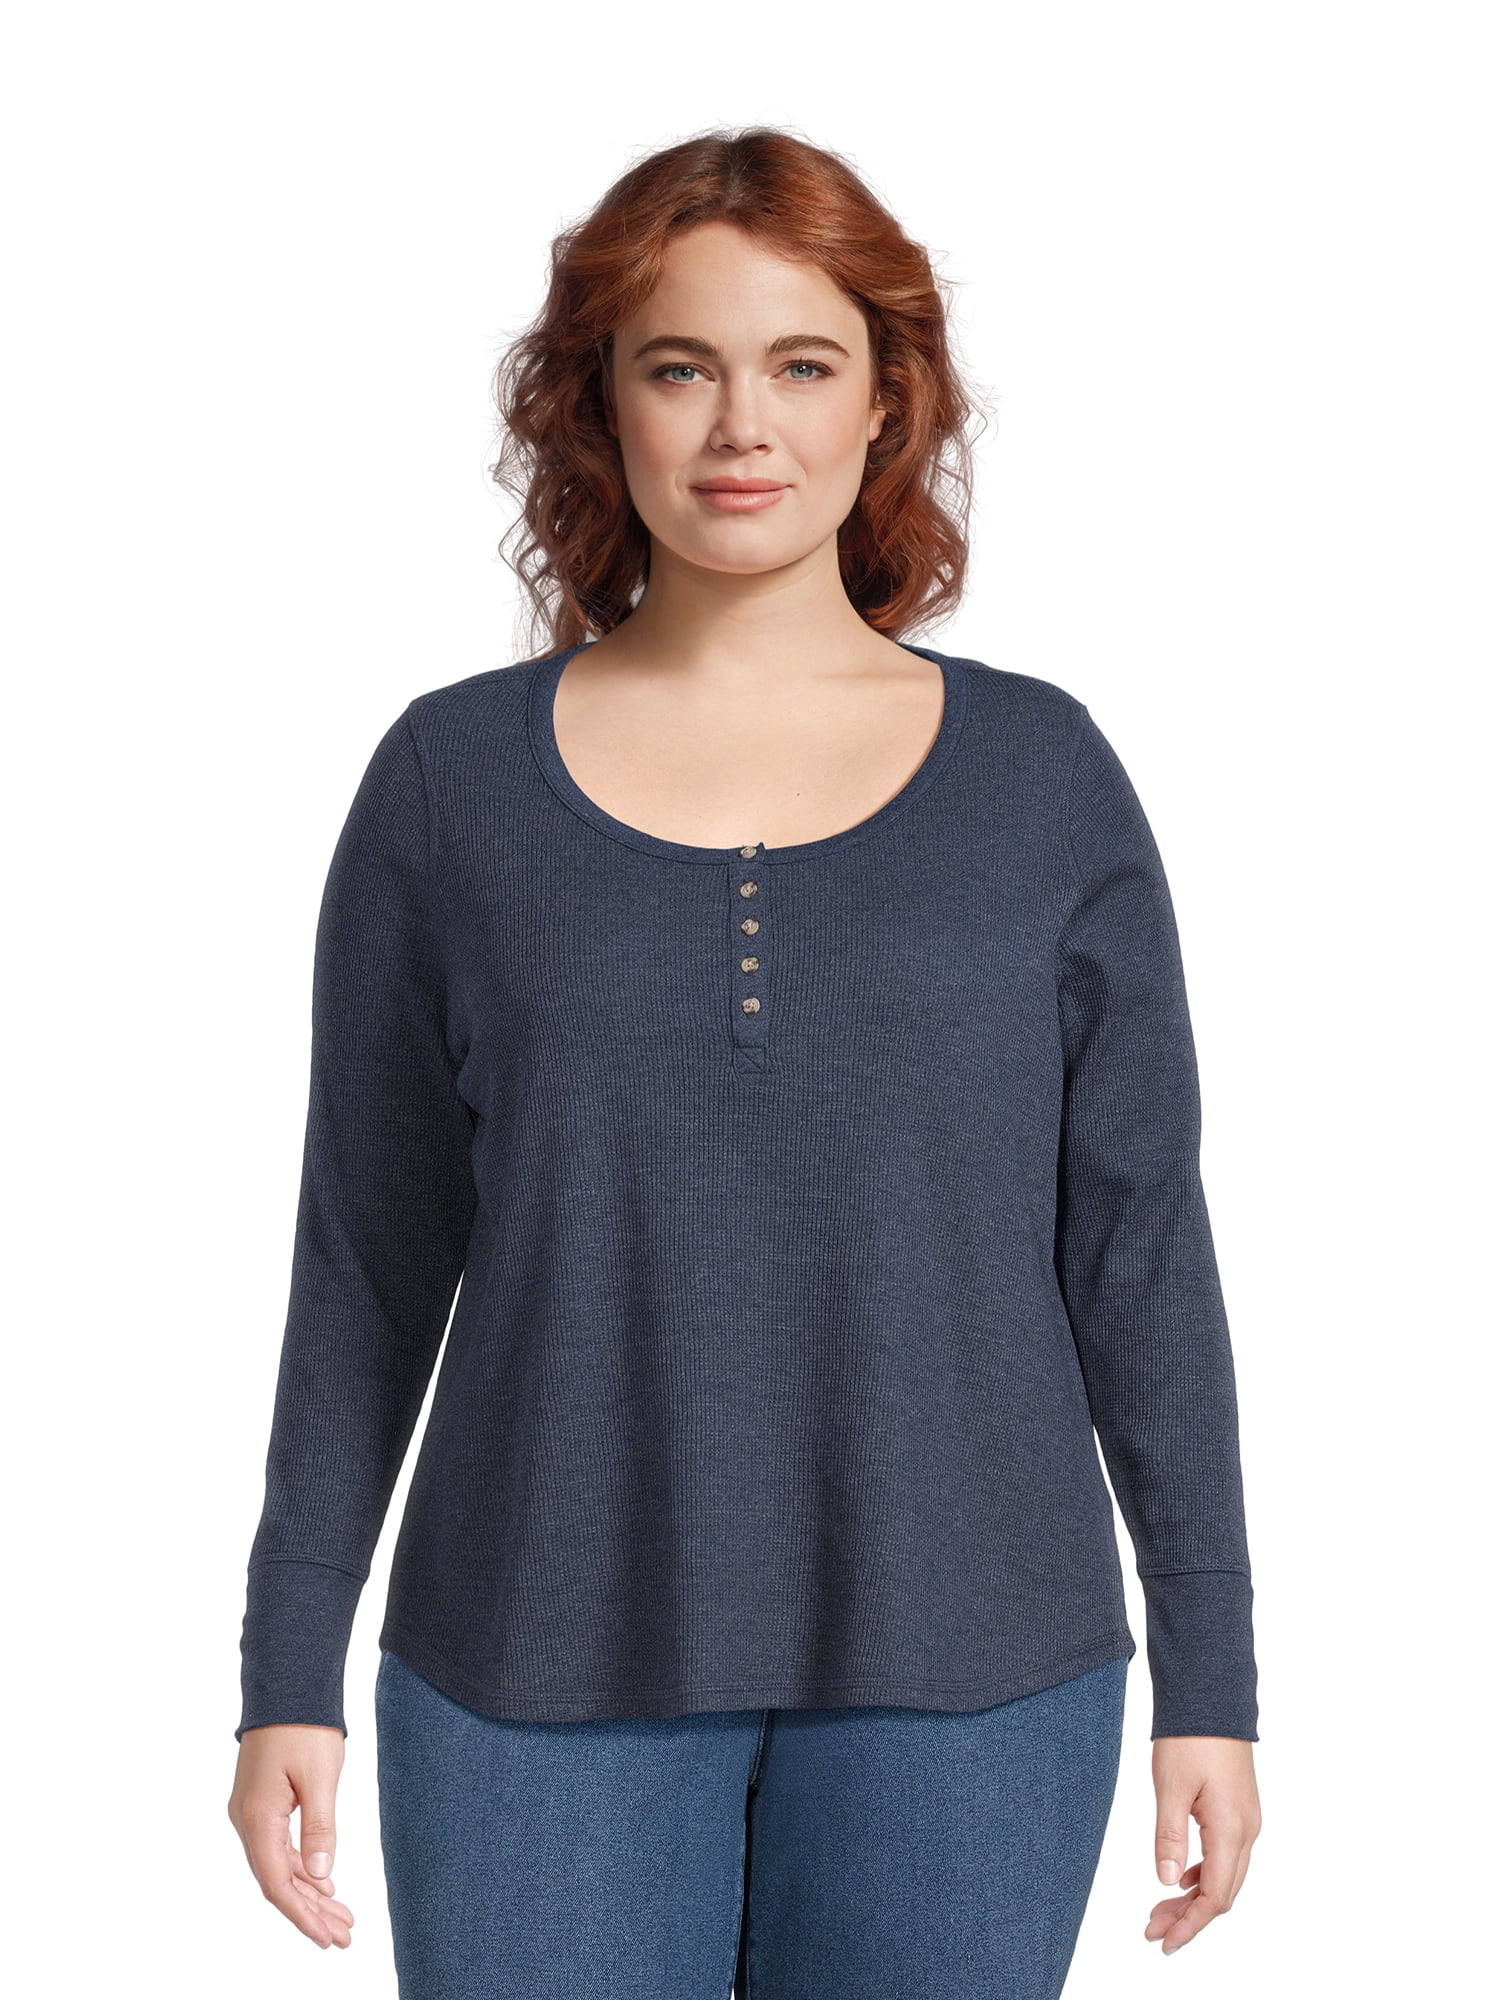 Terra & Sky Women's Plus Size Waffle Tee with Long Sleeves, Sizes 0X-4X ...